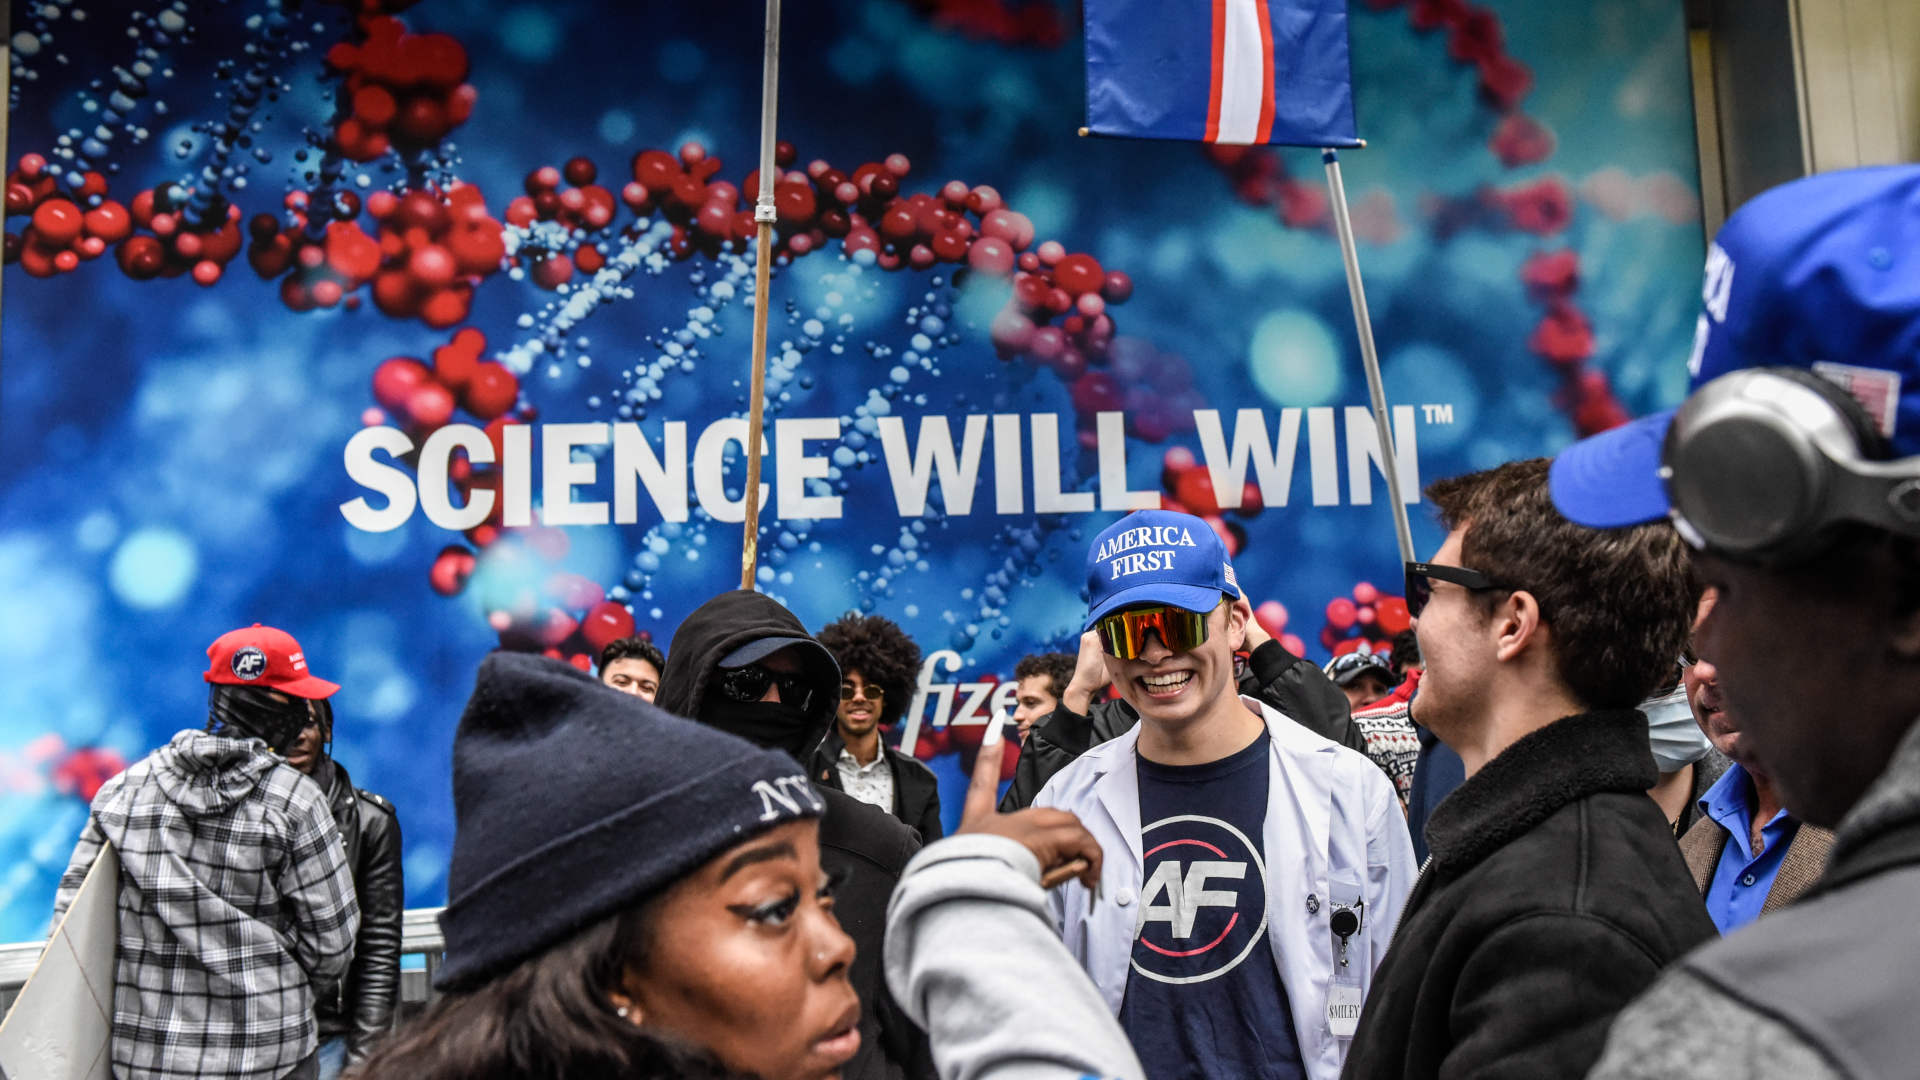 People associated with the far-right group America First attend an anti-vaccine protest in front of Pfizer world headquarters on November 13, 2021 in New York City.